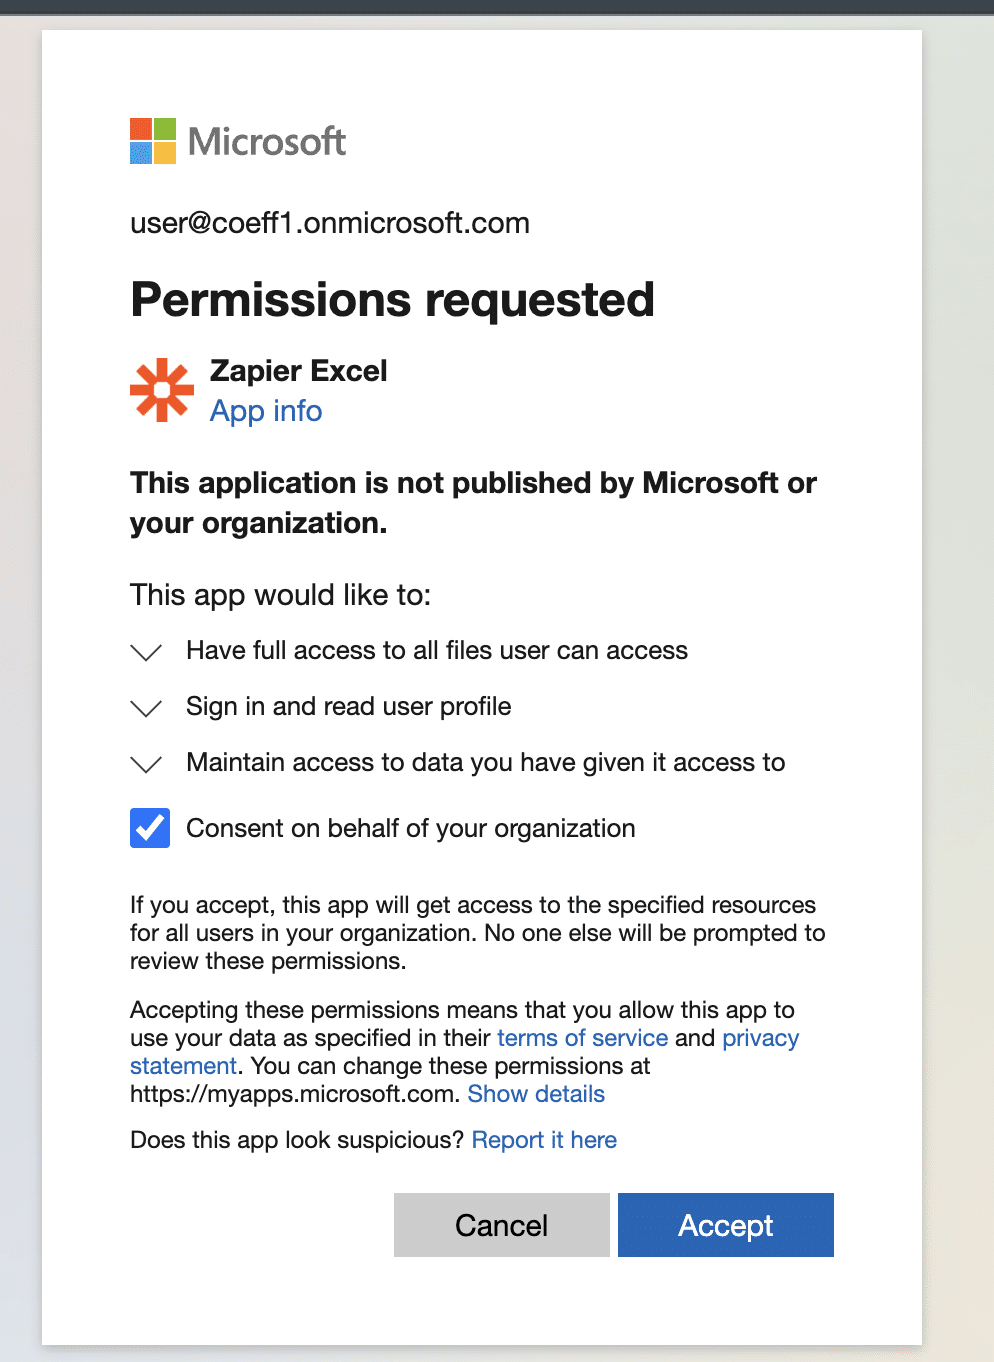 Linking Microsoft account to Zapier for Excel integration